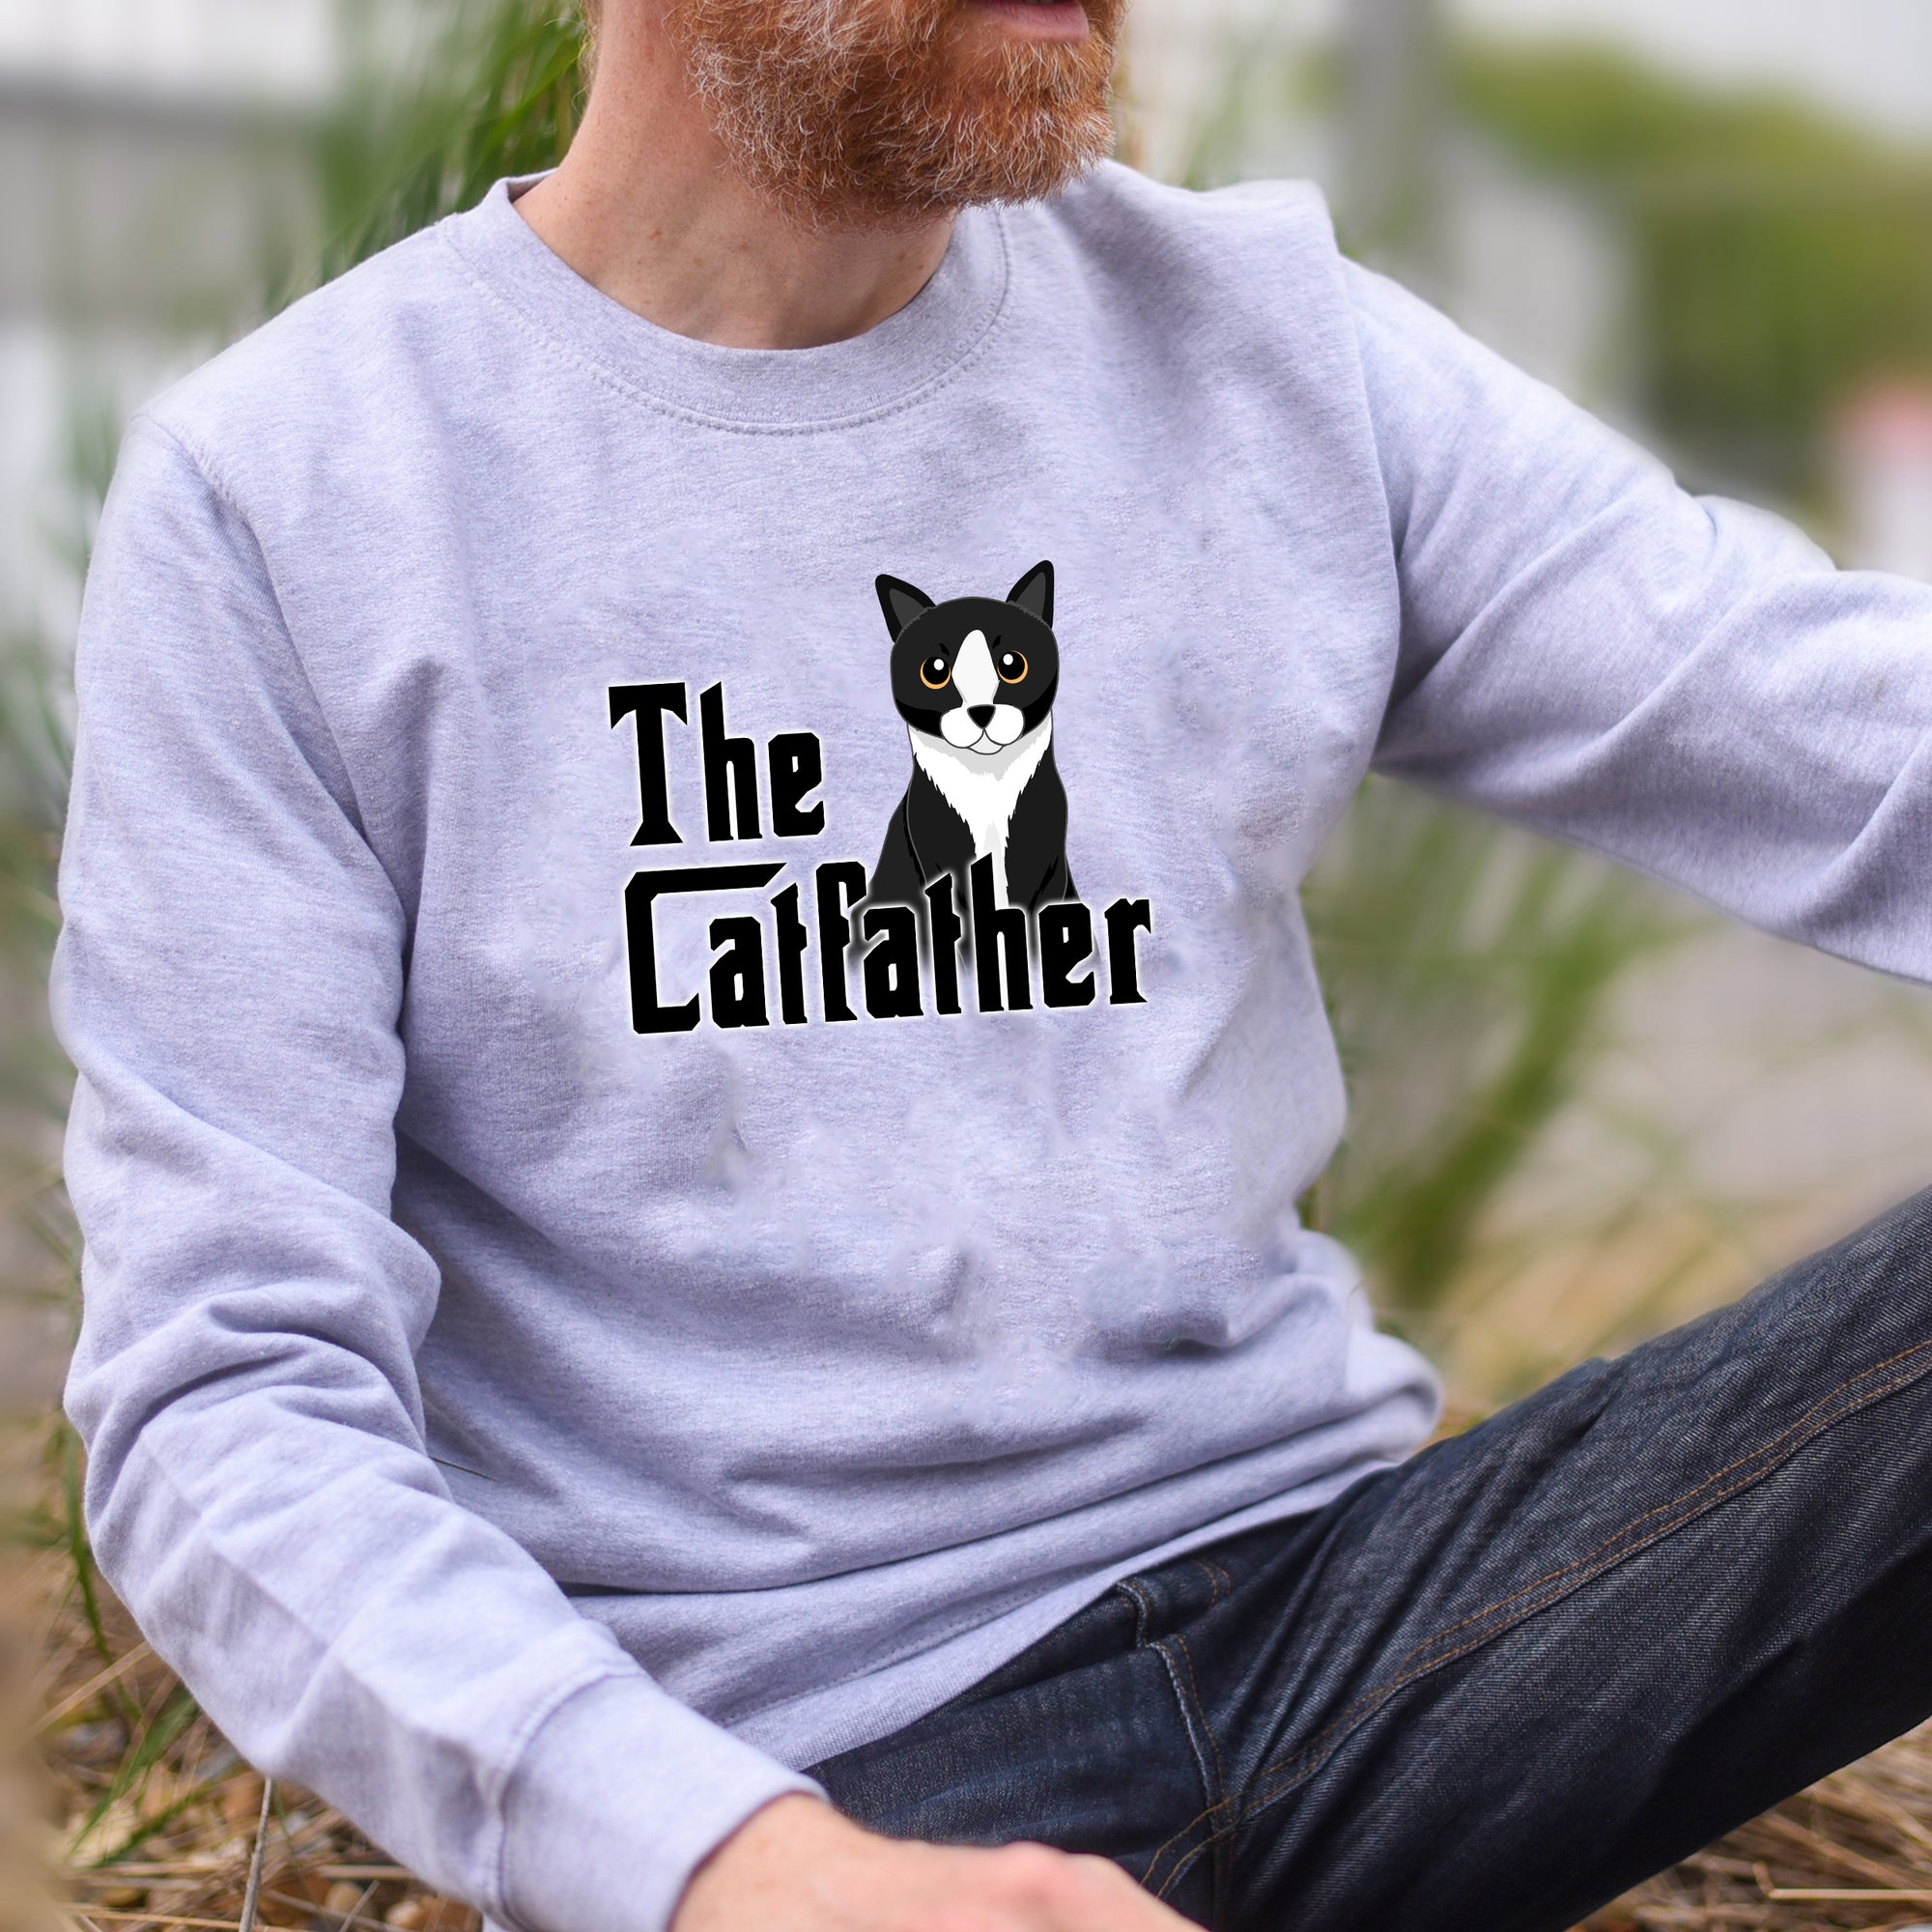 Personalised The Catfather Illustrated Sweater